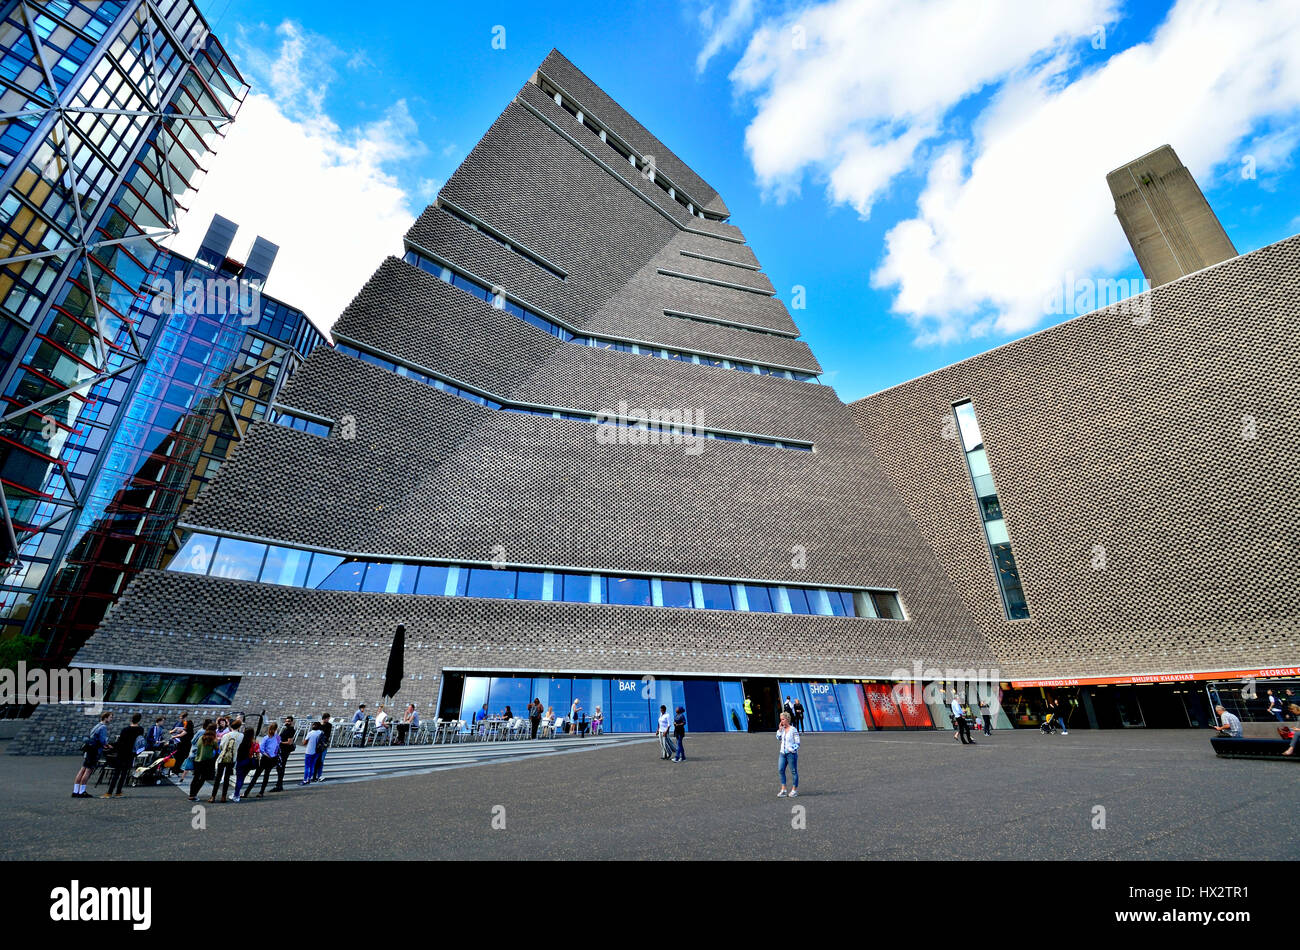 Londres, Angleterre, Royaume-Uni. Tate Modern art gallery - la nouvelle aile Pyramide Tower' (2016) Banque D'Images